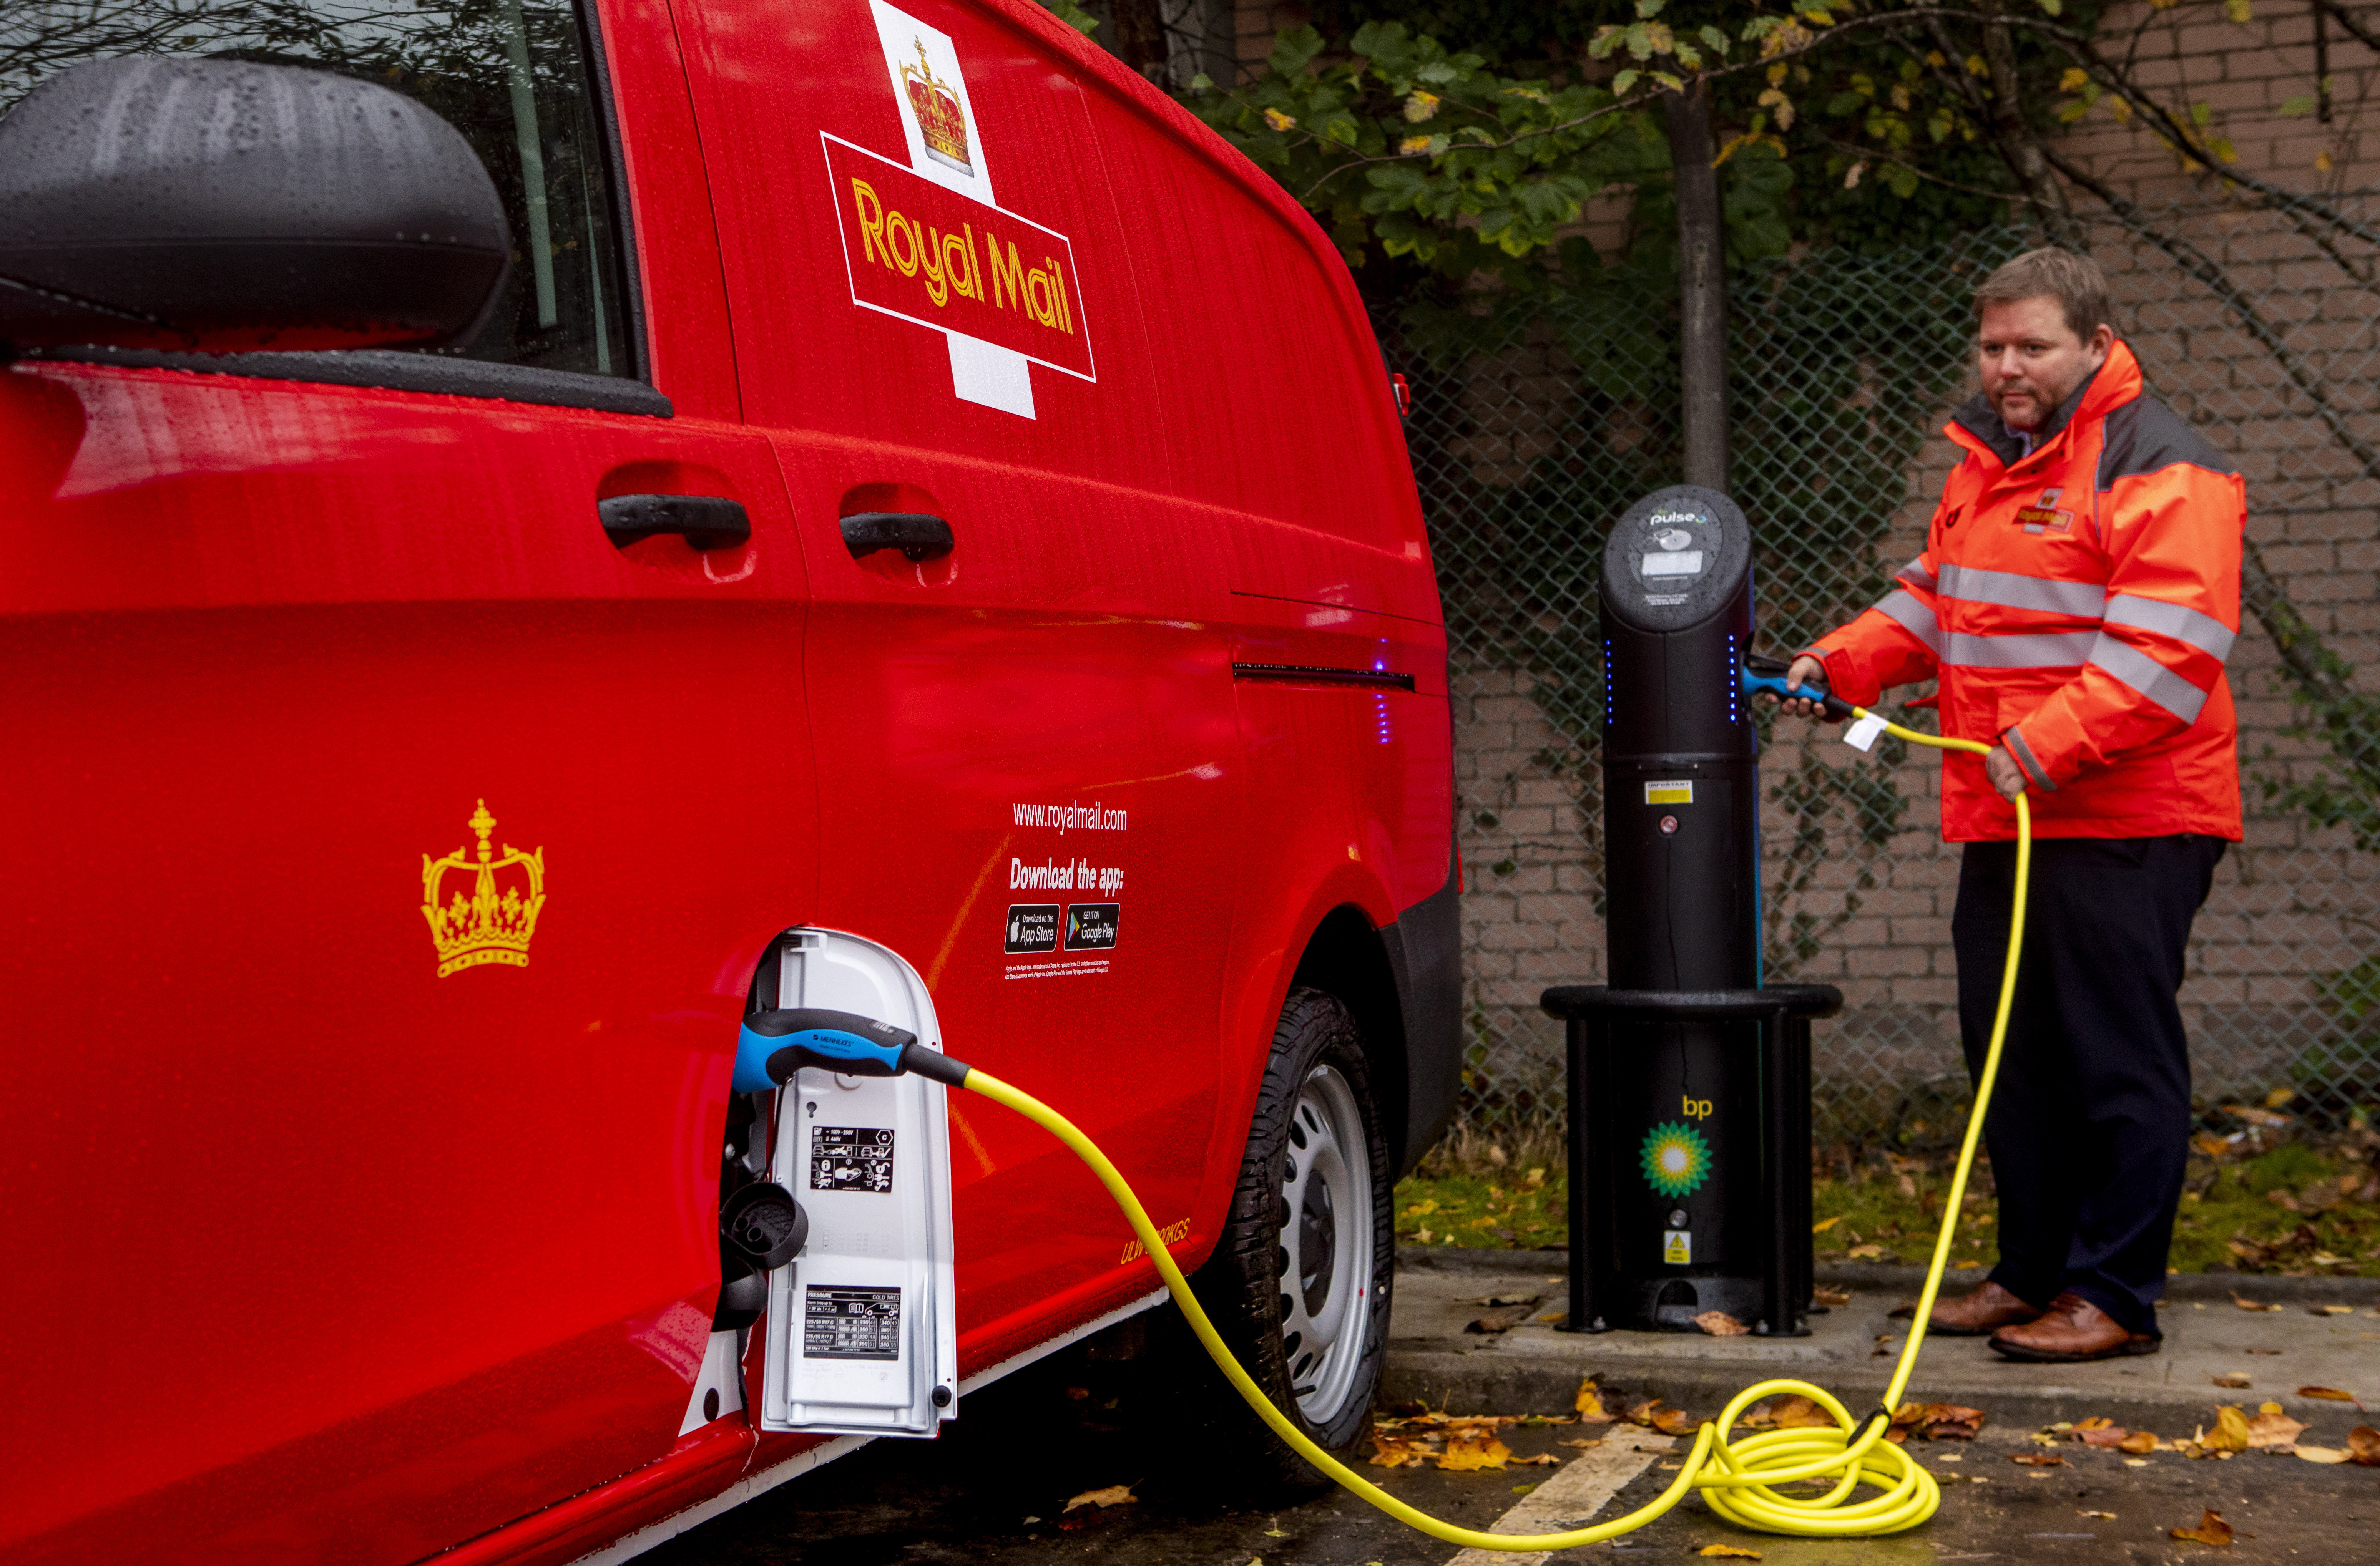 A Royal Mail worker charges an electric van